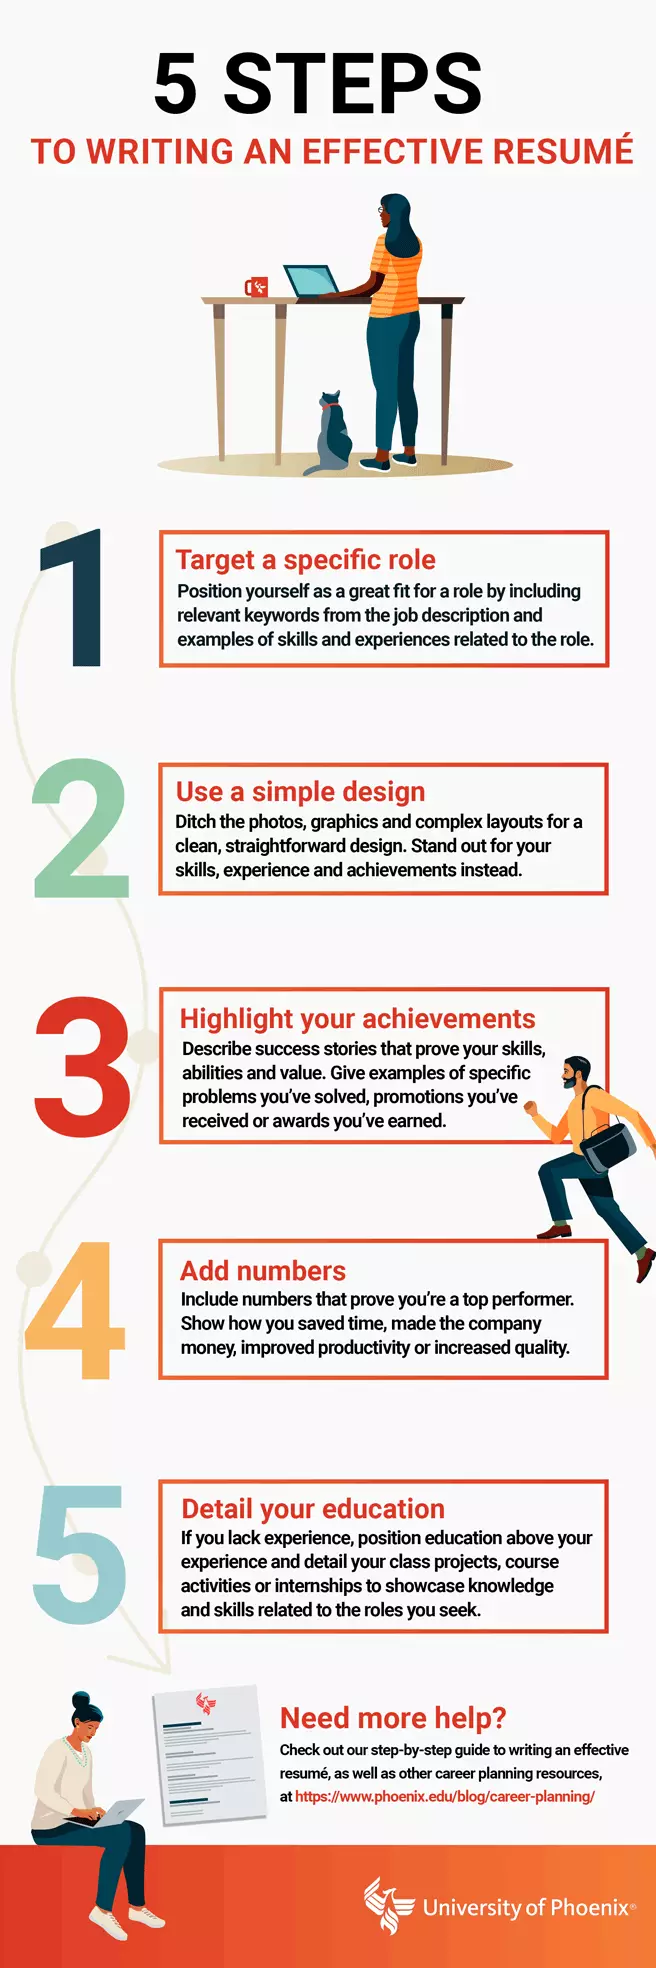 Infographic on detailing steps outlined in article on writing an effective resume